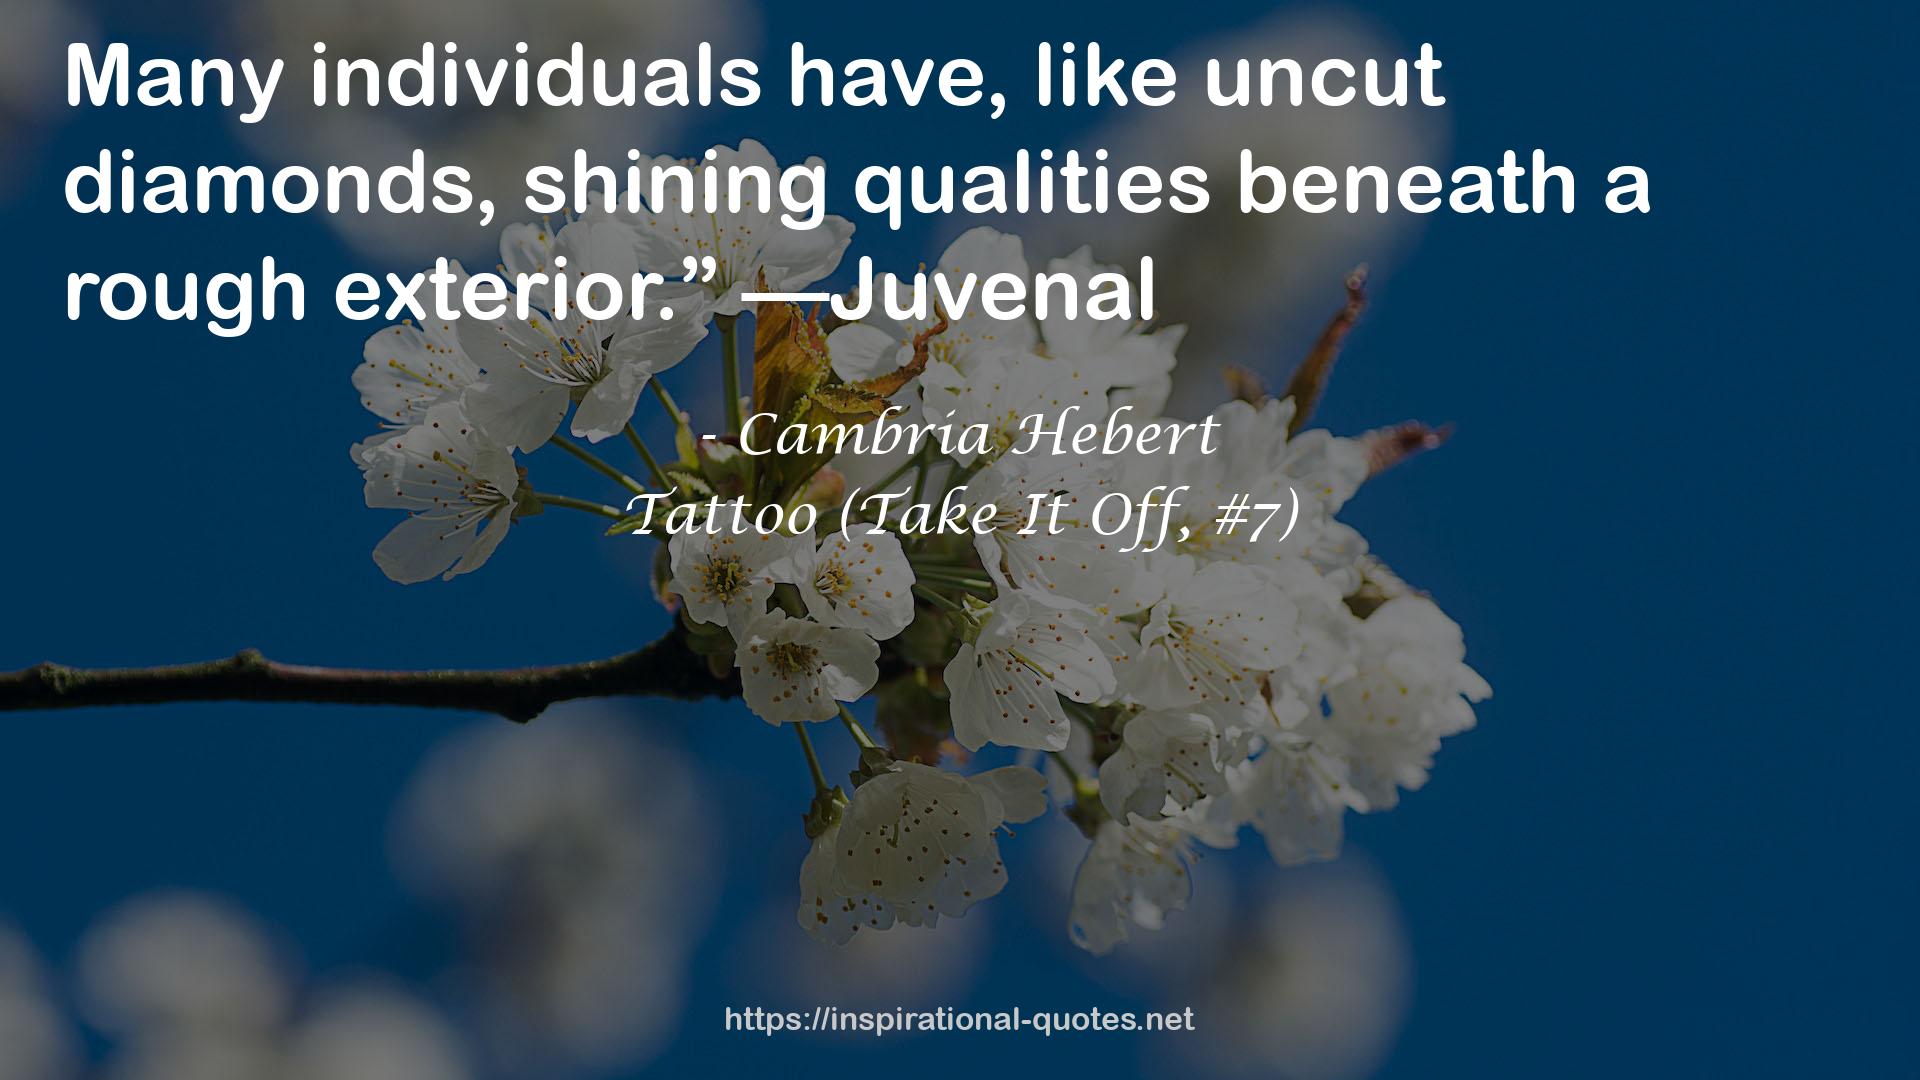 Tattoo (Take It Off, #7) QUOTES